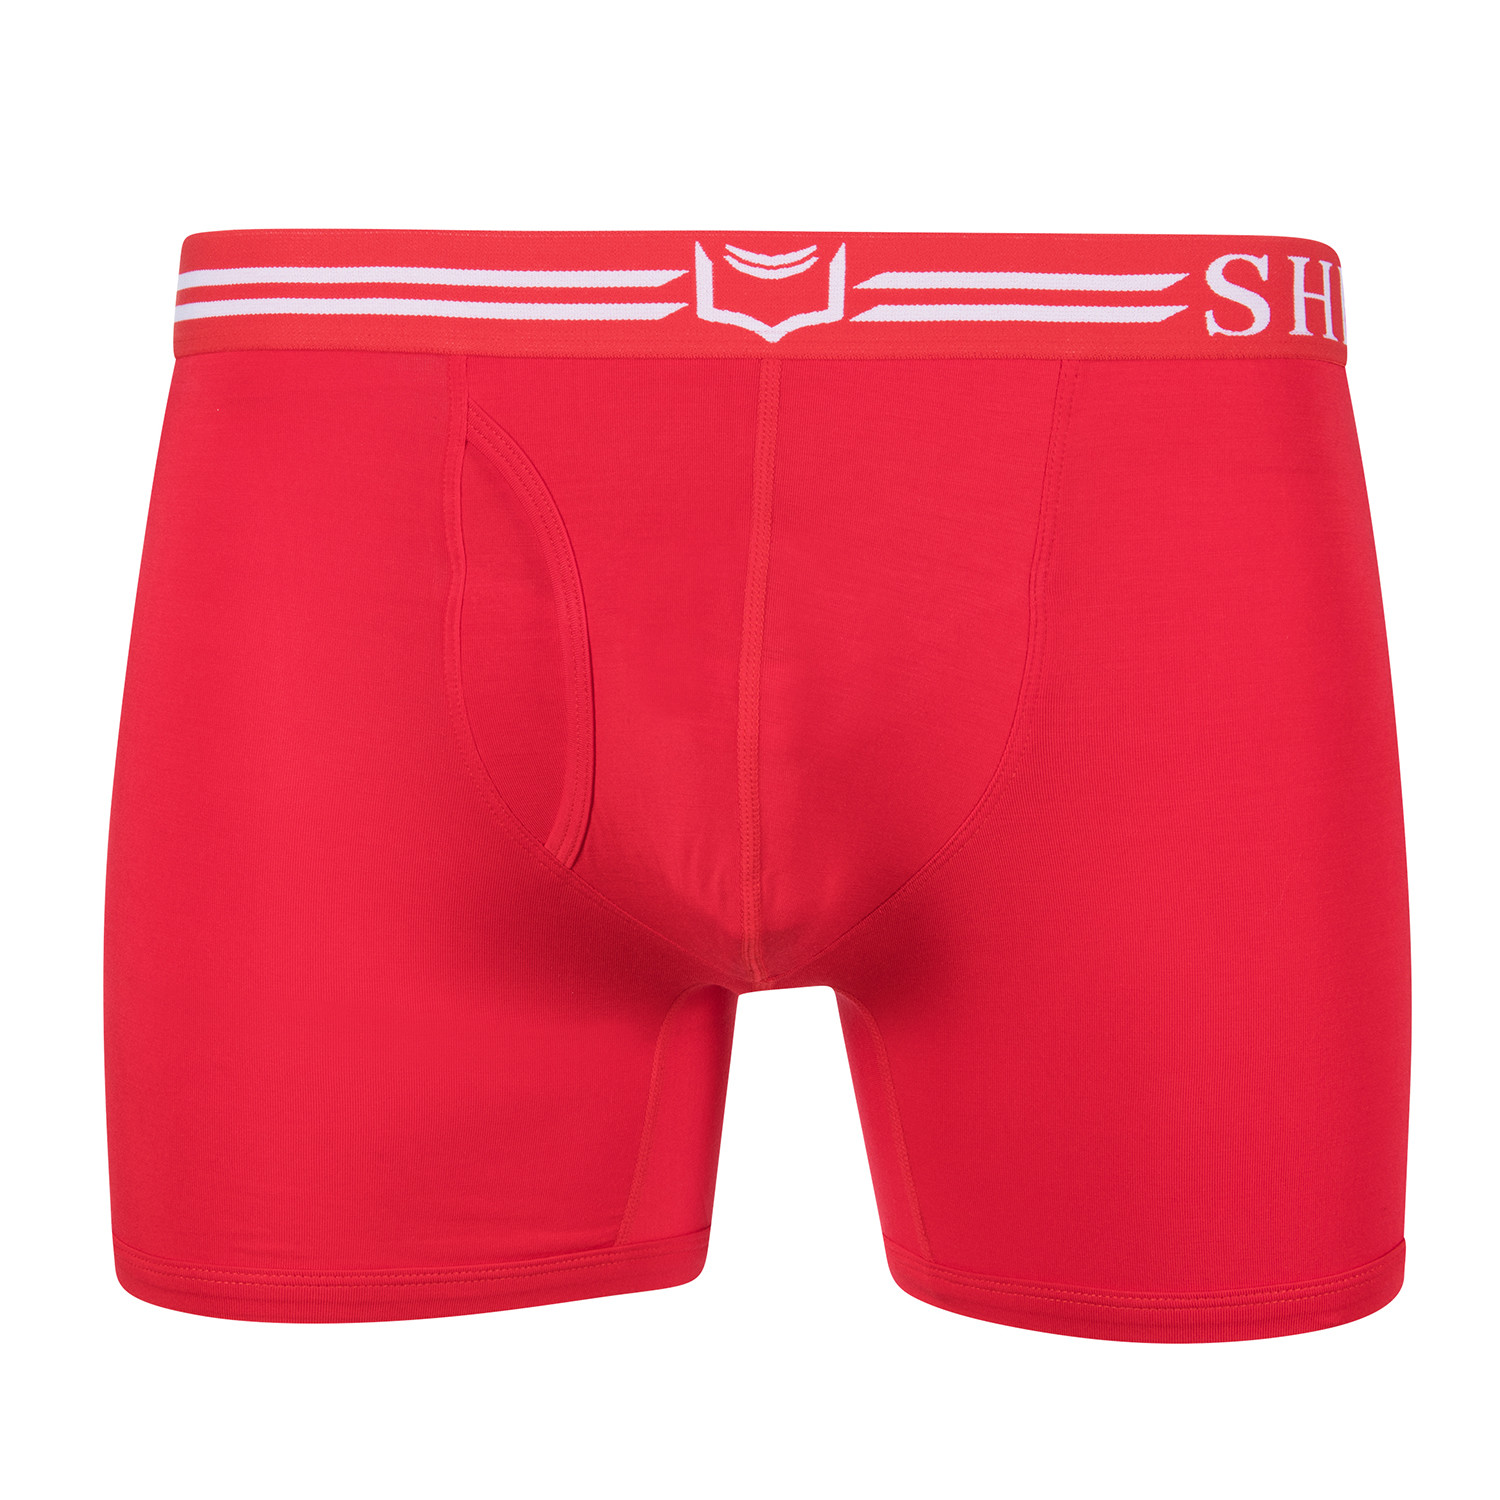 SHEATH 4.0 Men's Dual Pouch Boxer Brief // Red (Large) - Sheath Underwear -  Touch of Modern